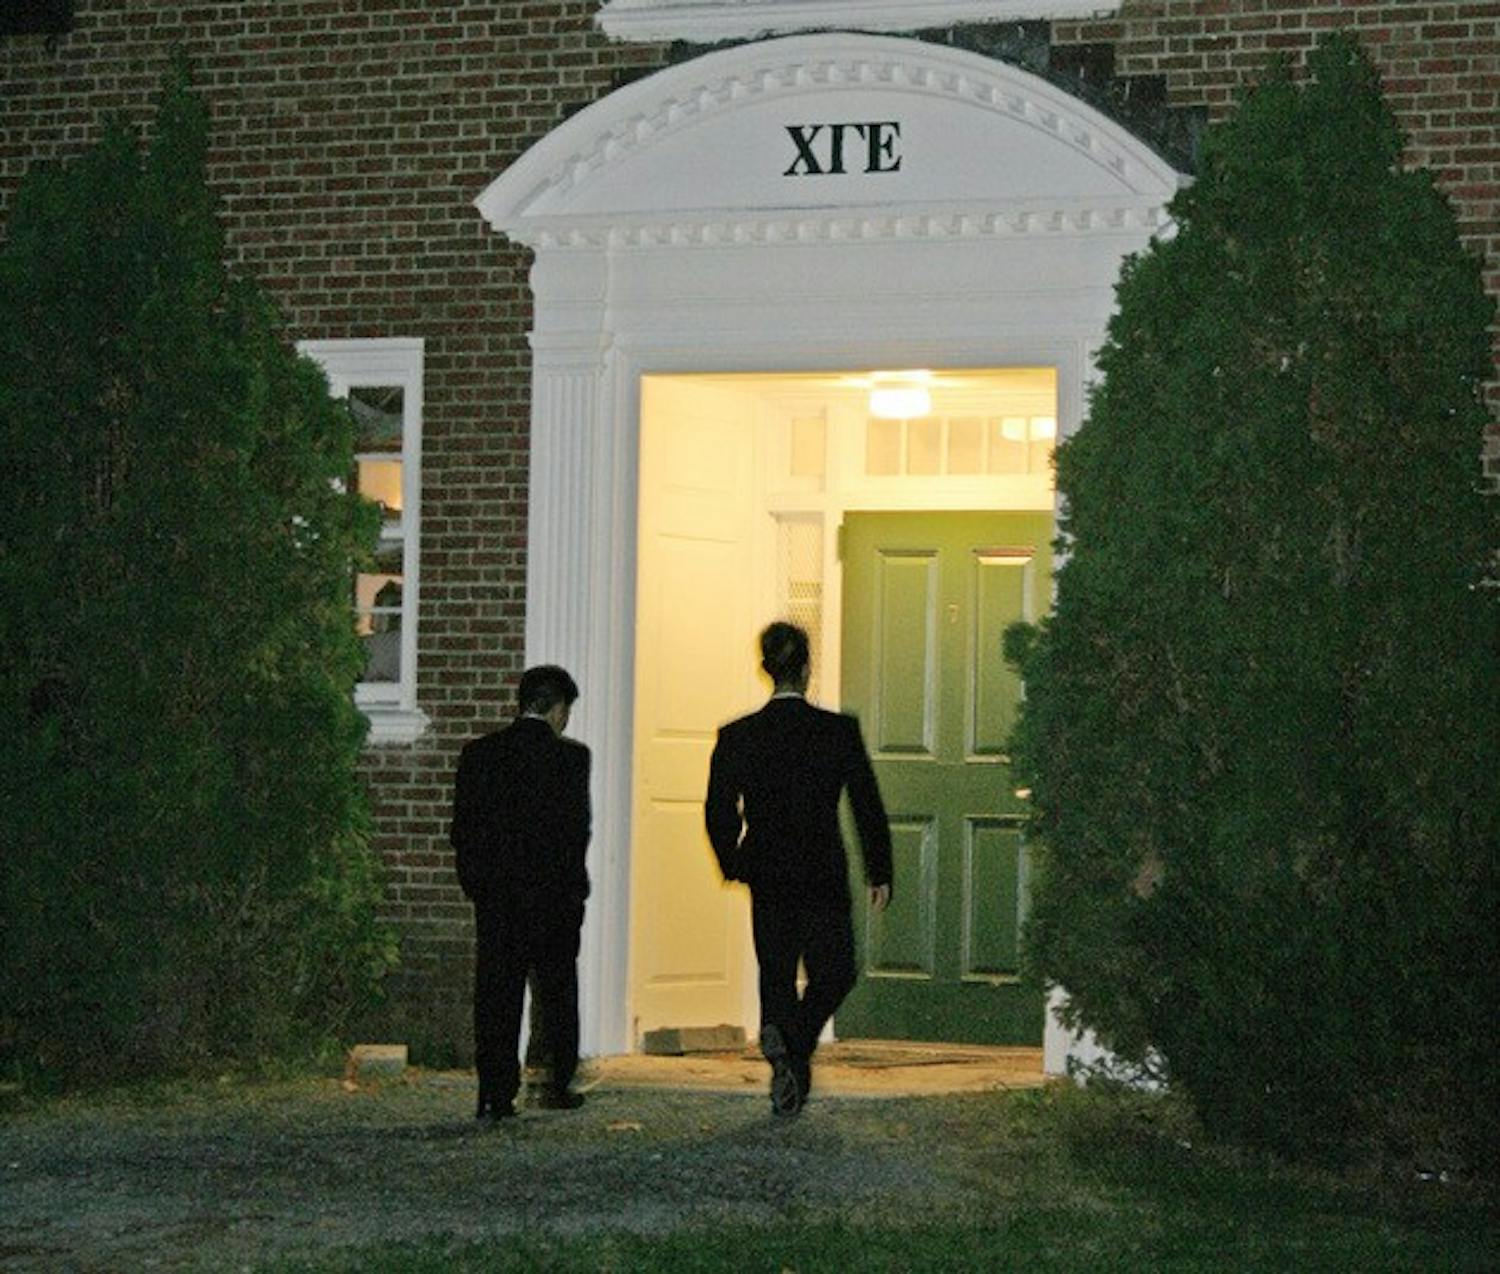 Two men attend rush Sunday evening at Chi Gamma Epsilon fraternity. Estimates so far show a higher number of rushees this year compared to last year.